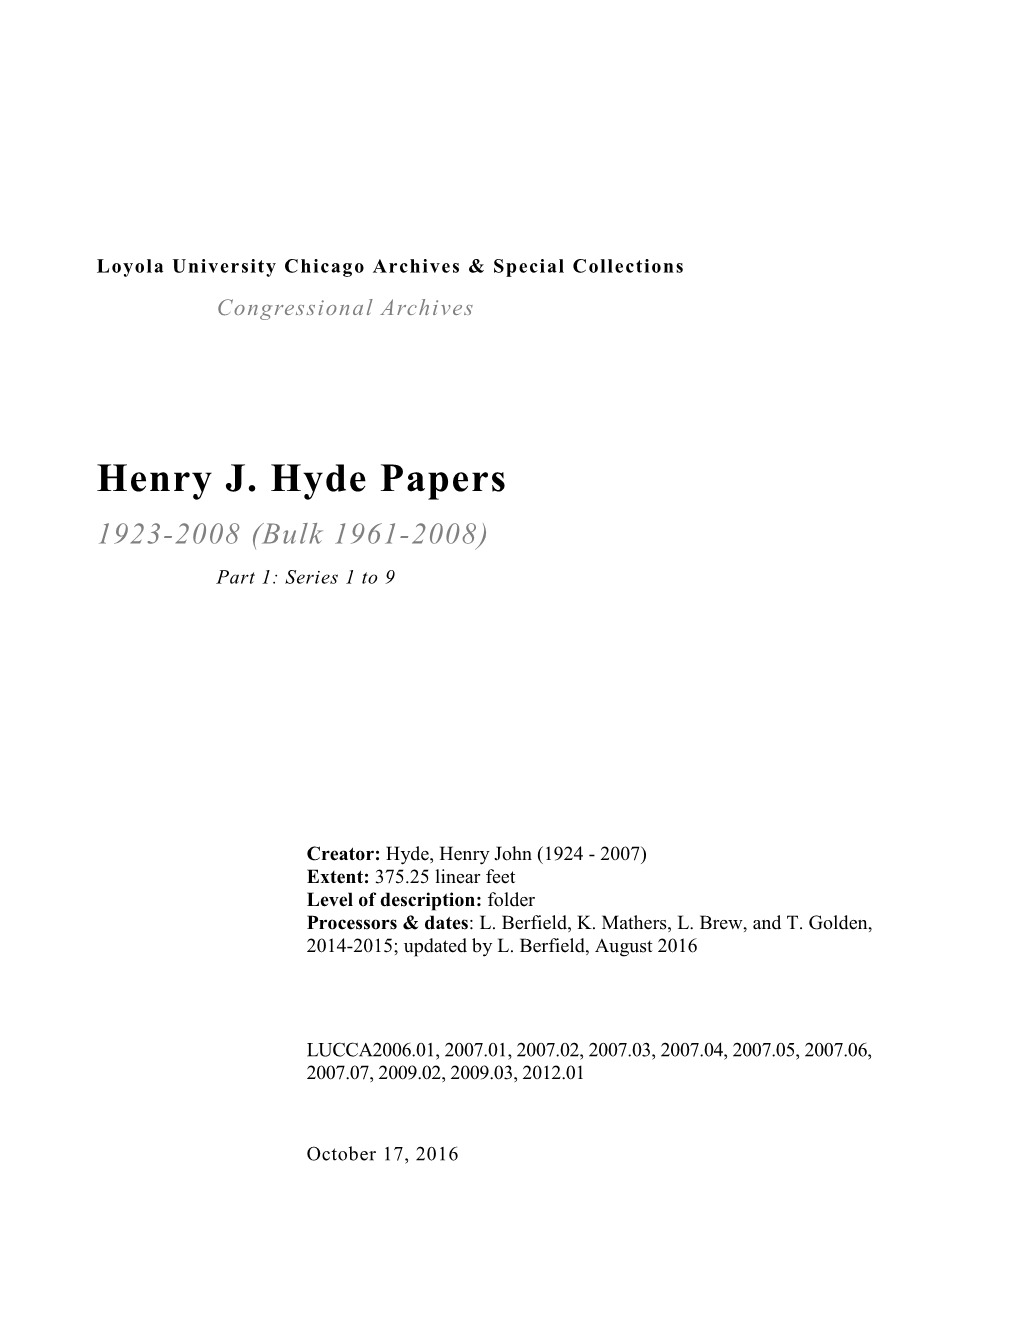 Henry J. Hyde Papers 1923-2008 (Bulk 1961-2008) Part 1: Series 1 to 9